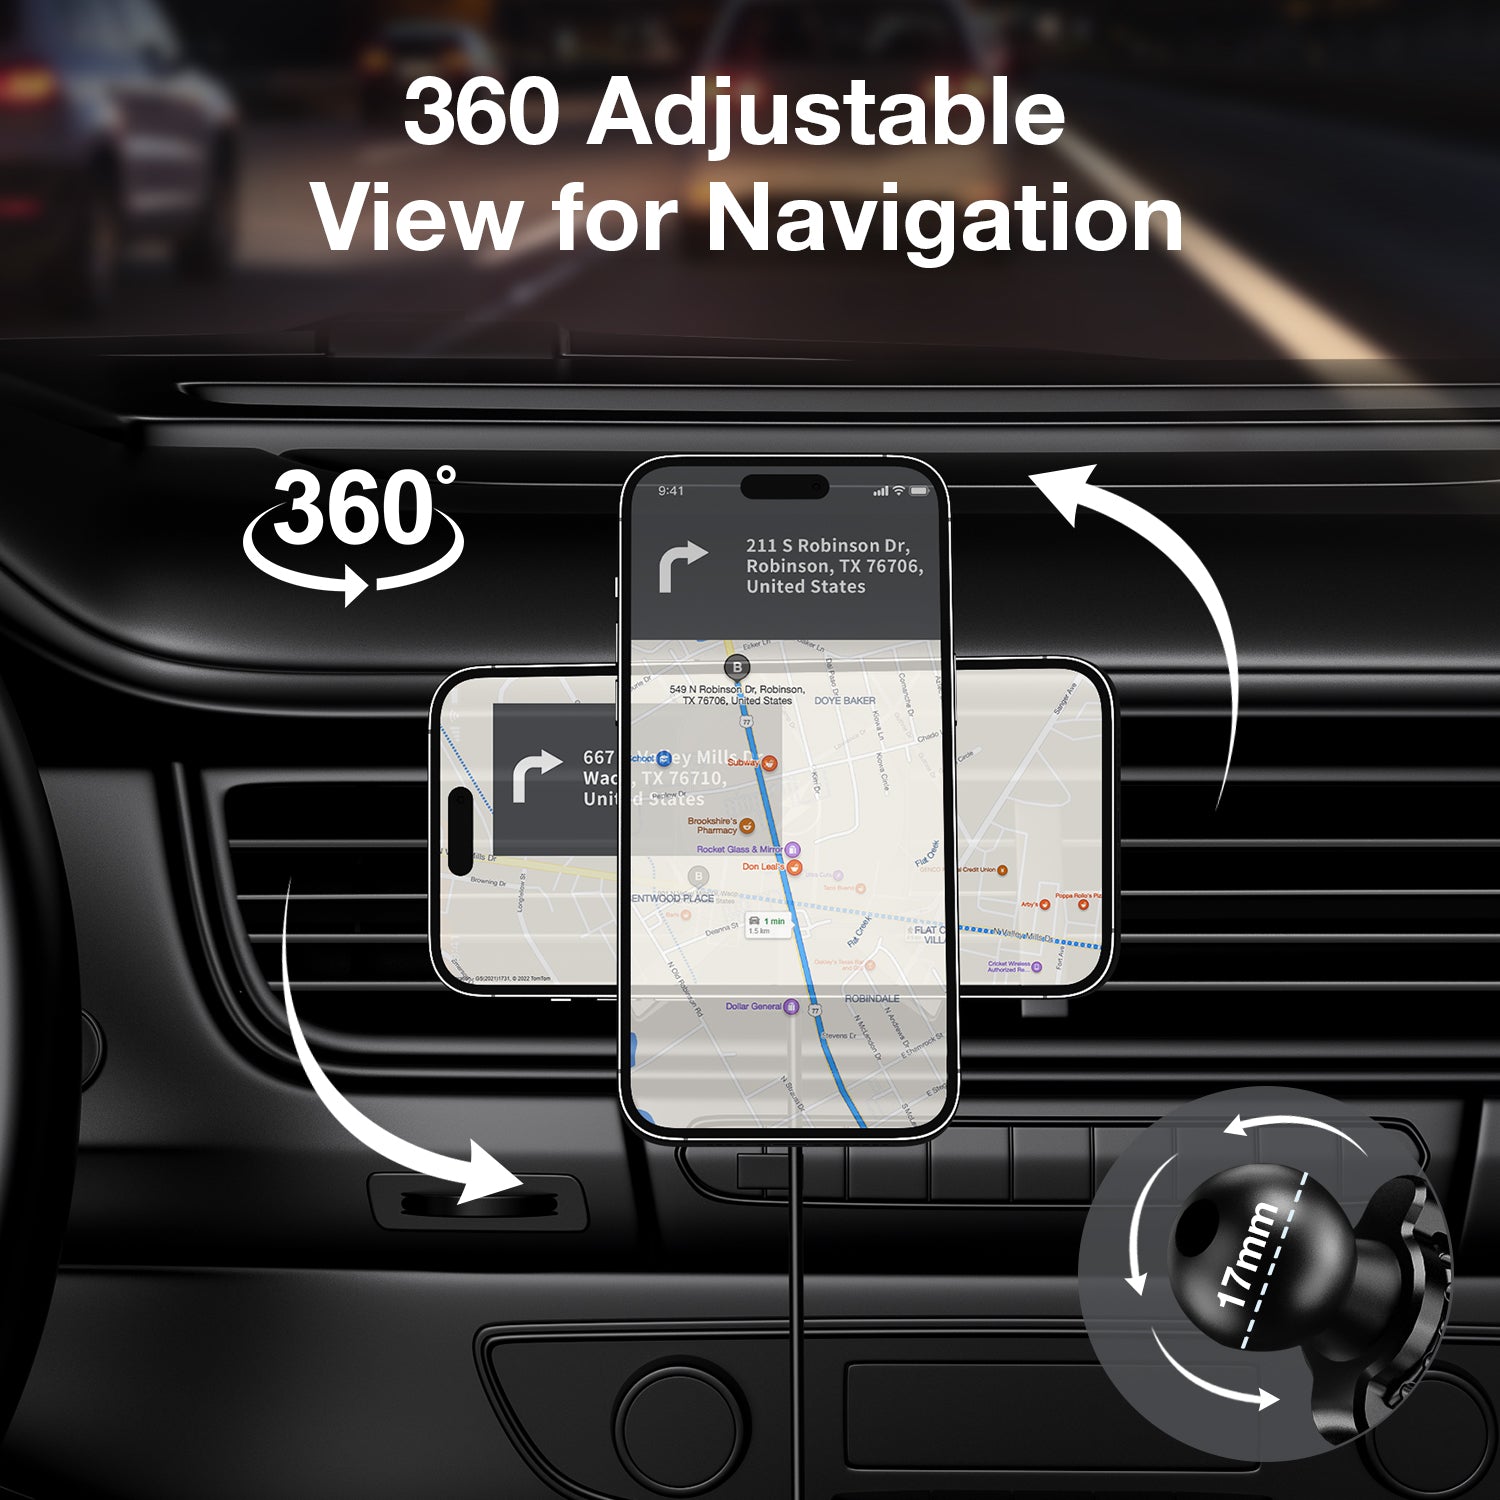 Tough On Magnetic Wireless Car Charger Mount with MagSafe and Car Charger